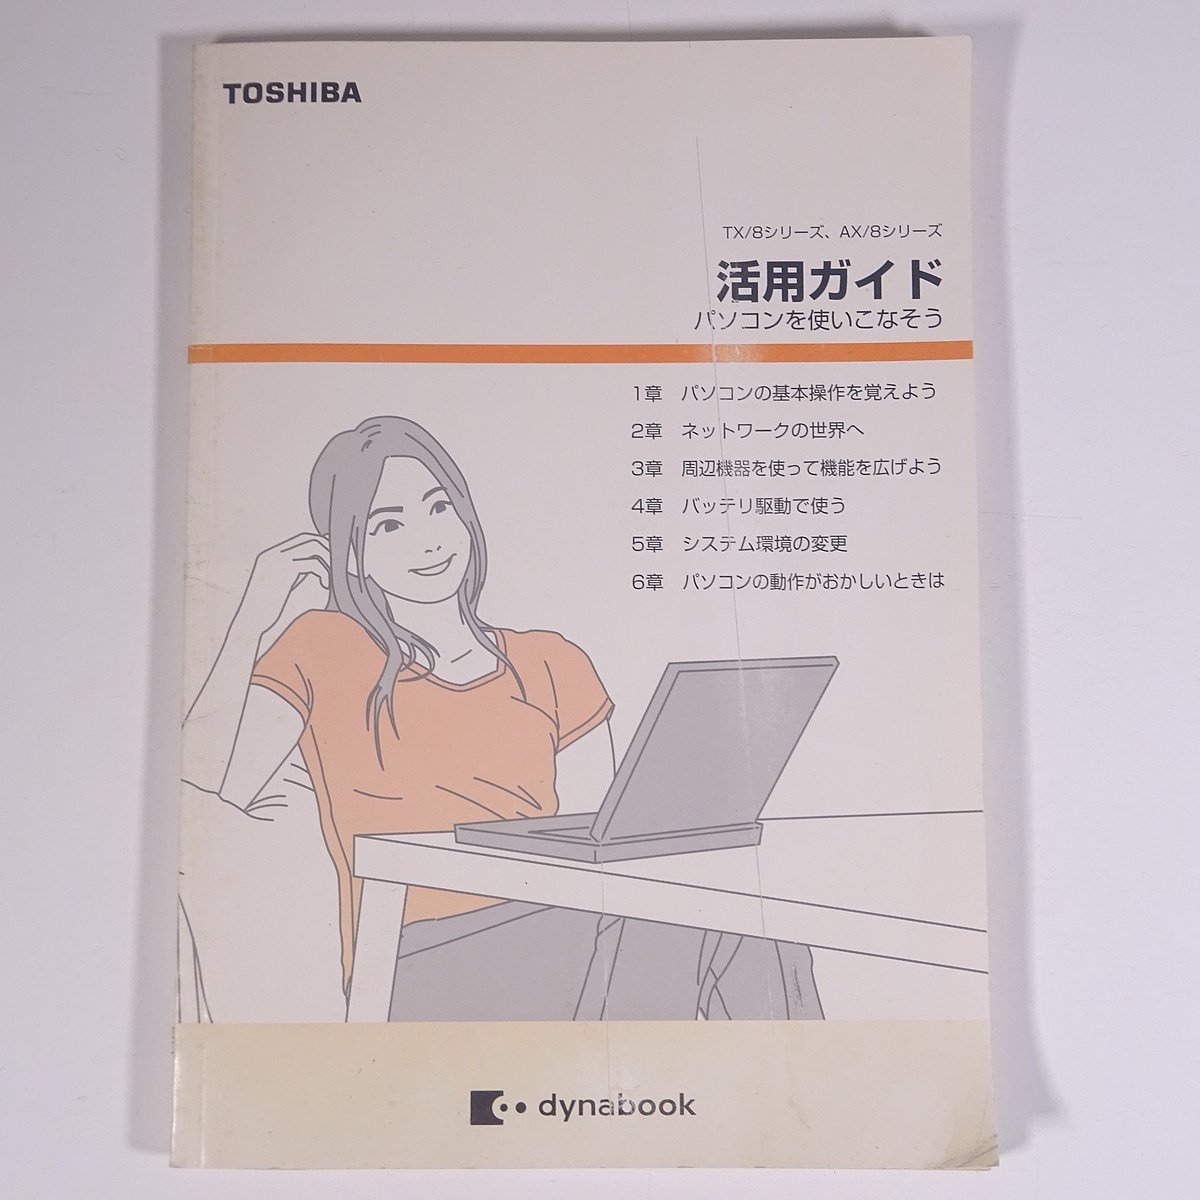 [ owner manual only ] TOSHIBA Toshiba laptop dynabook TX/8 series AX/8 series practical use guide large book@ personal computer PC manual 